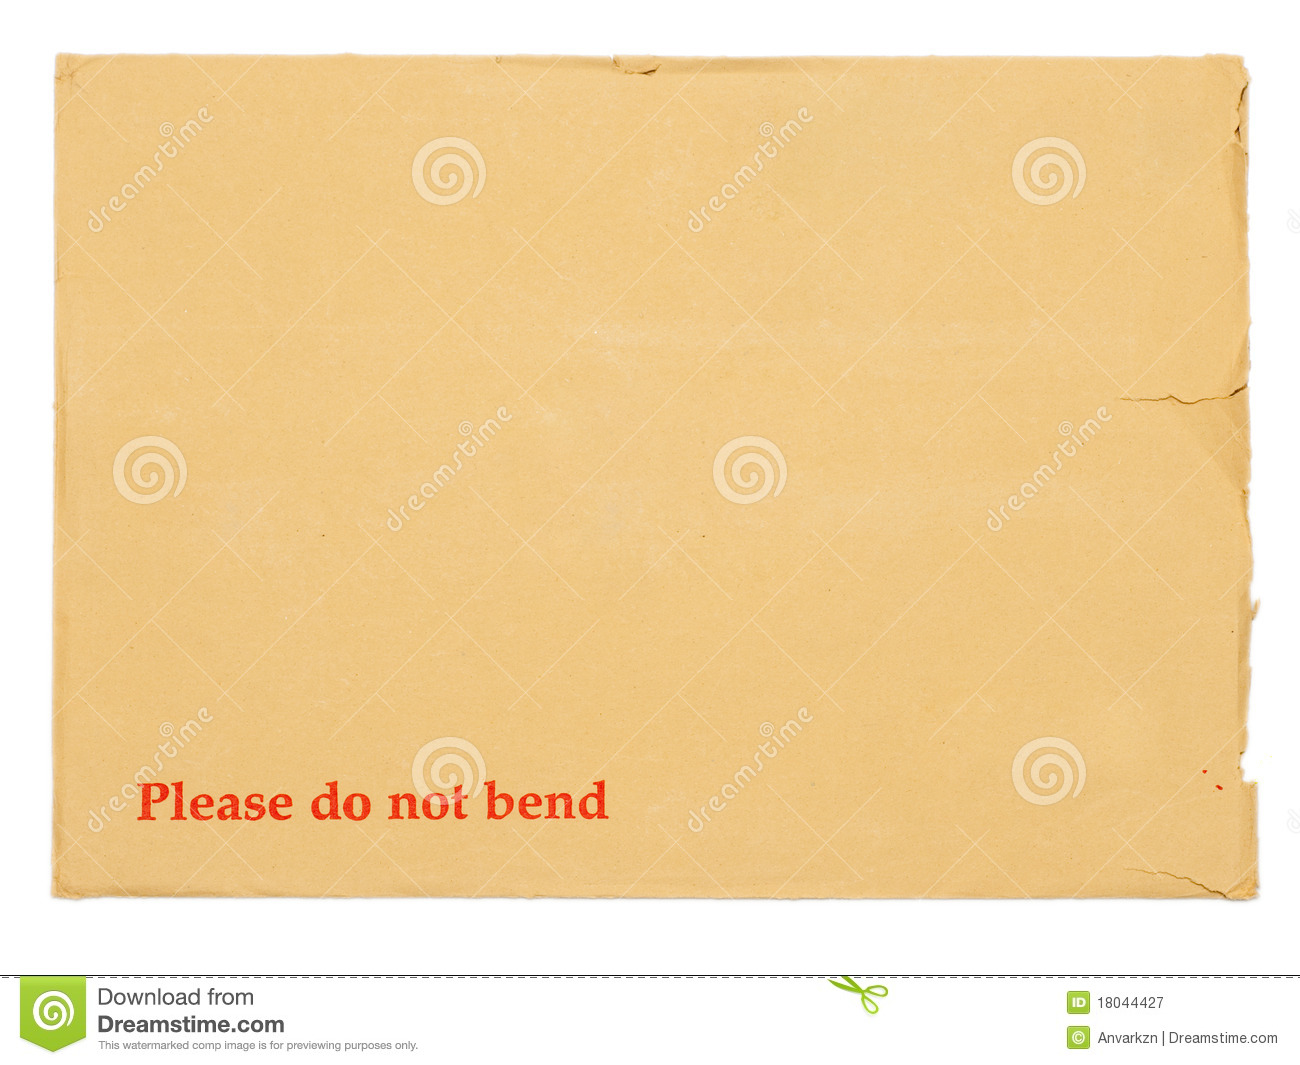 Blank Envelope For Important Documents  Royalty Free Stock Photography